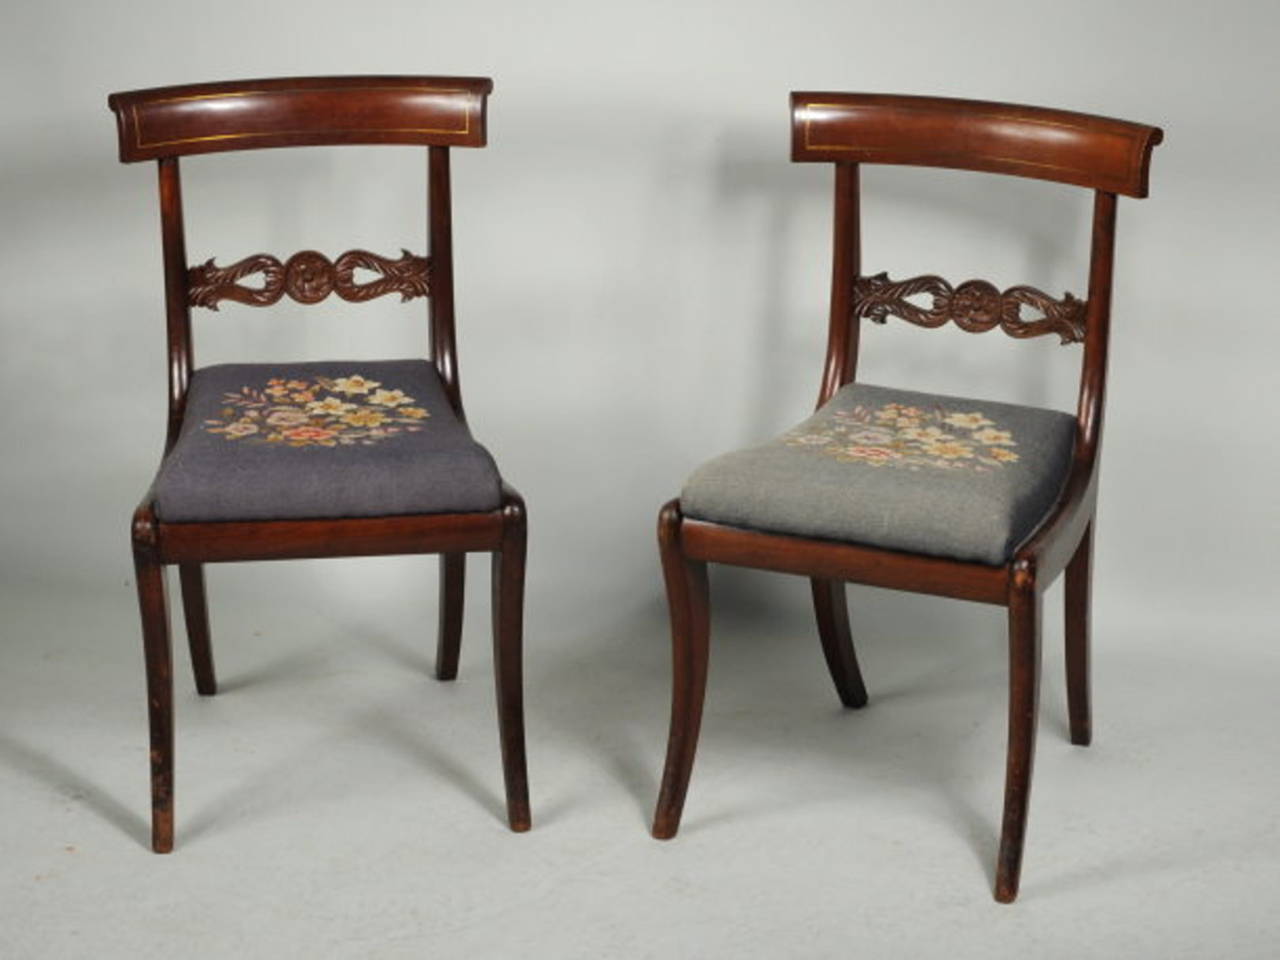 Fine pair of carved and brass inlaid mahogany side chairs with
curved and rolled crest rails with brass string inlay, set on stiles centering a carved horizontal splat with carved central boss and leafage, with slip seats raised on shaped sabre